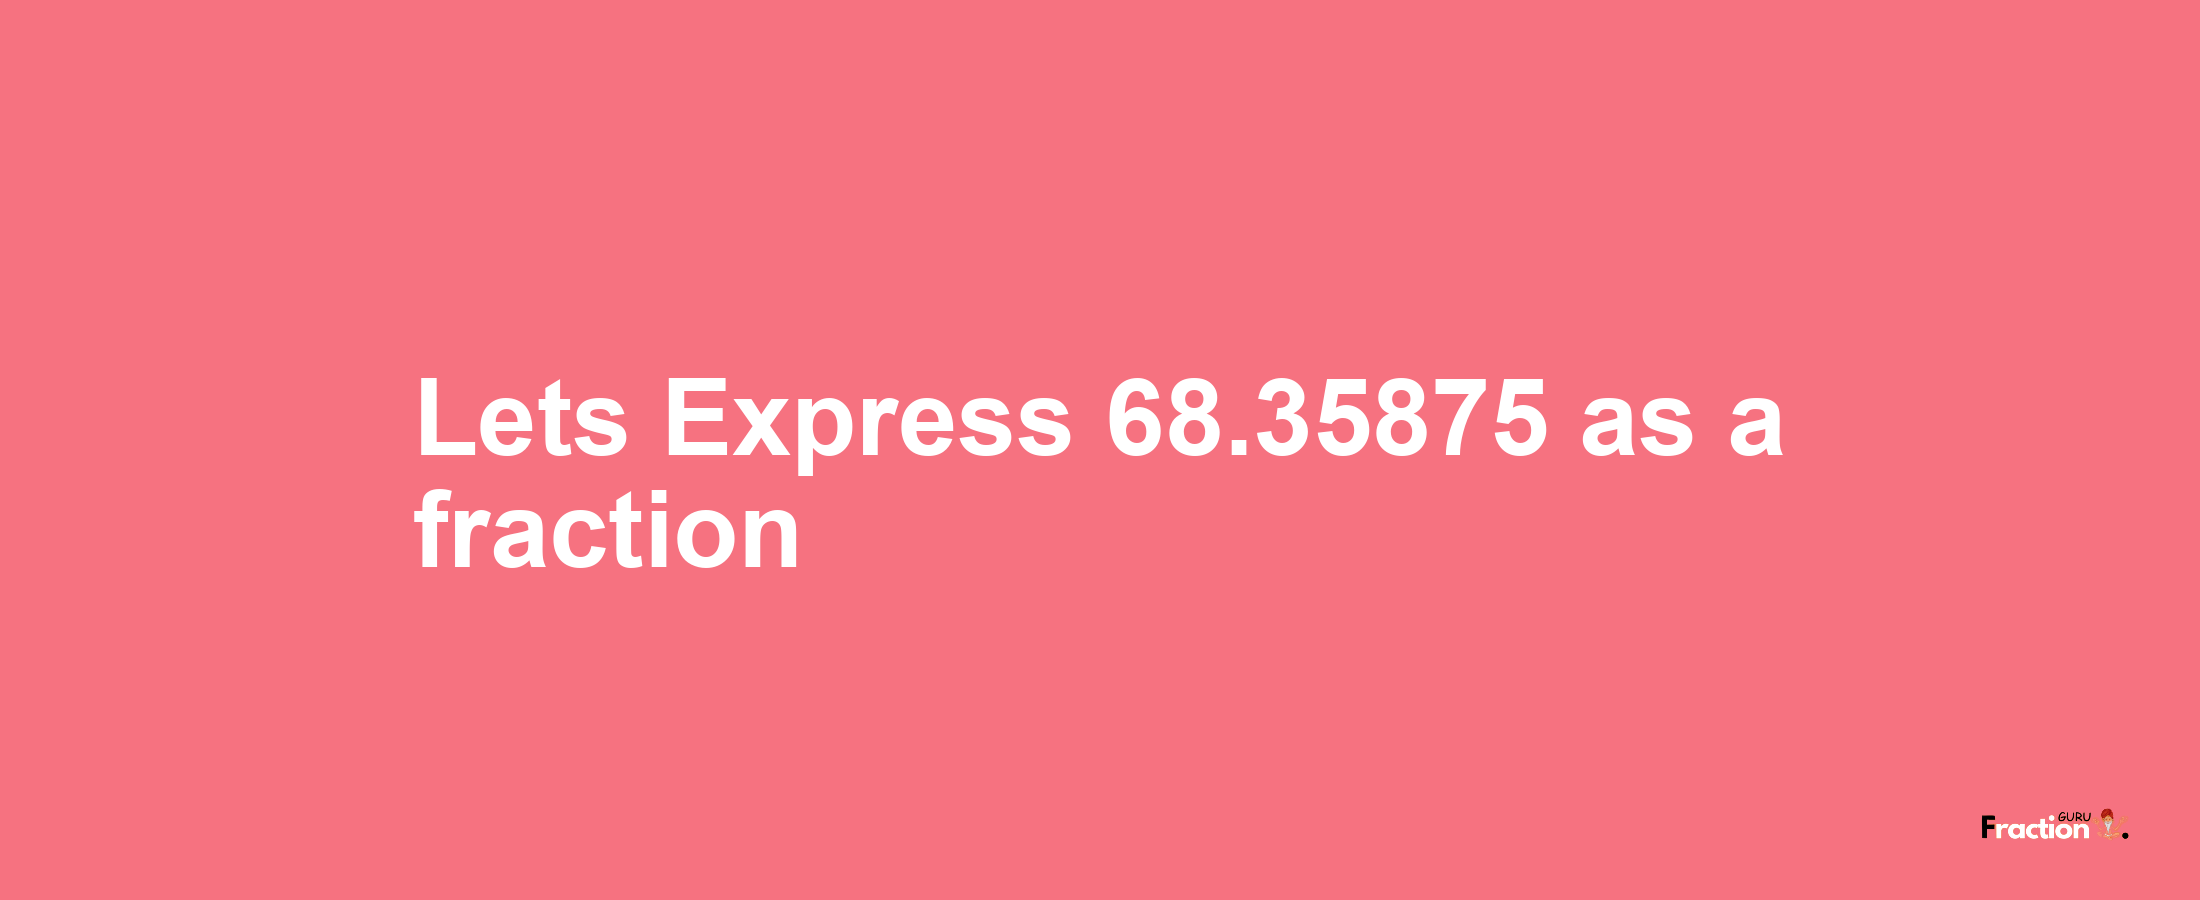 Lets Express 68.35875 as afraction